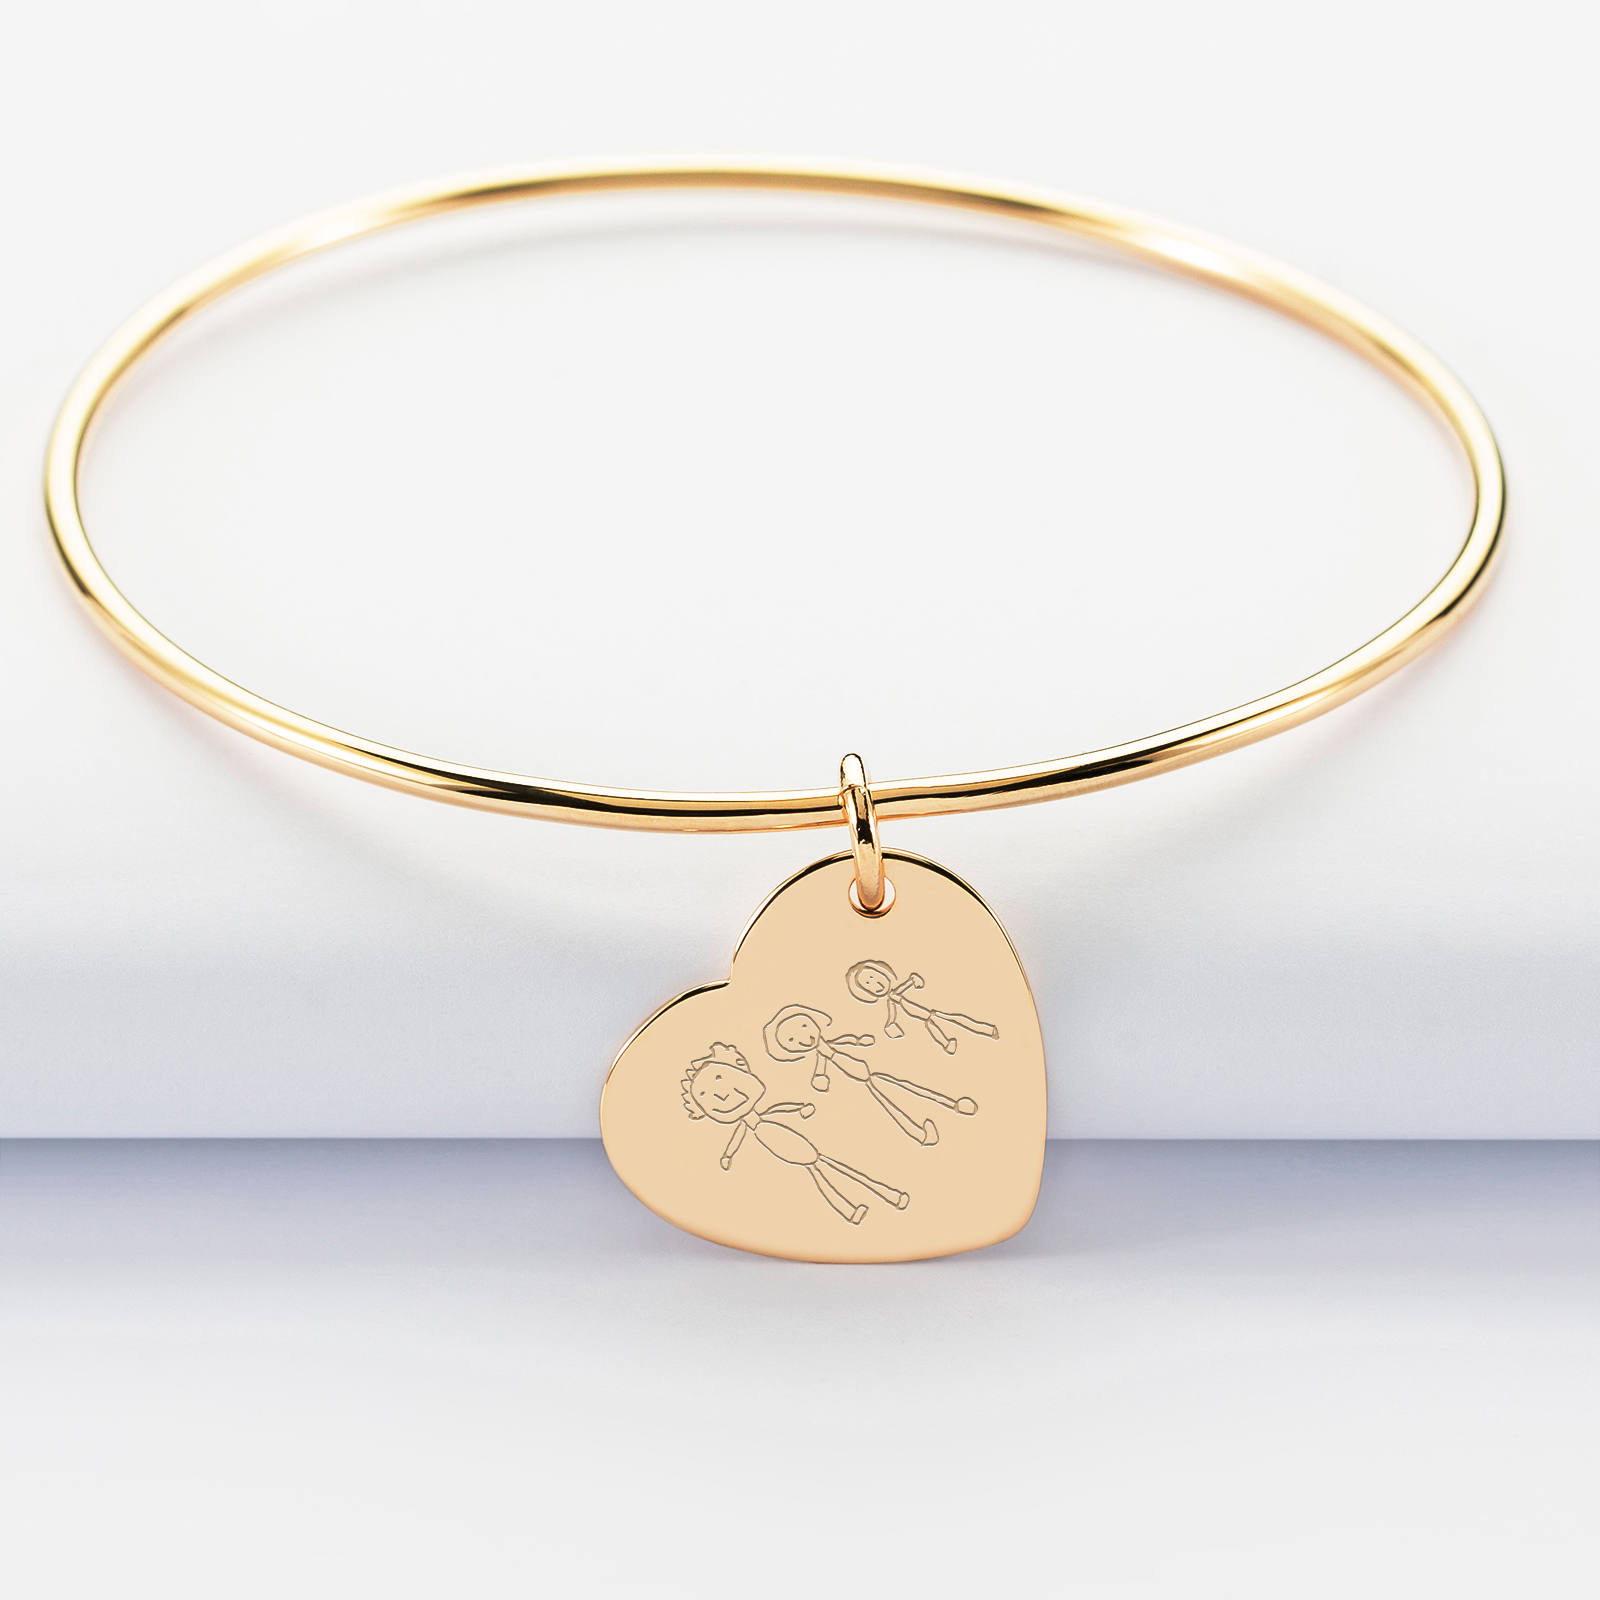 Personalised gold-plated bangle and engraved heart medallion 19x21mm - sketch